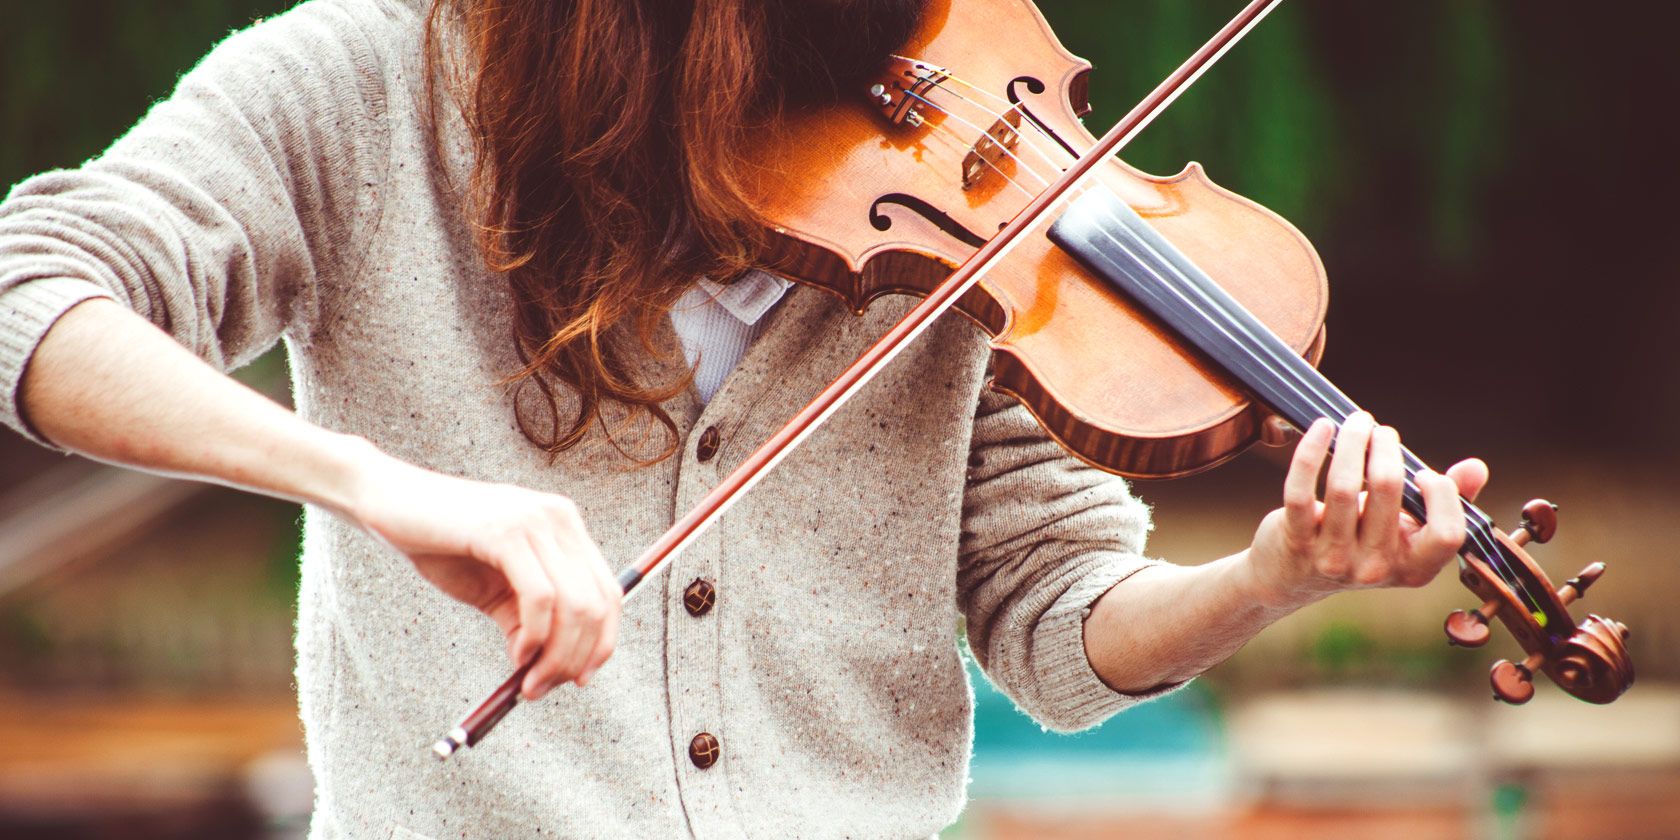 Learn To Play The Violin For Free With These 8 Tutorials